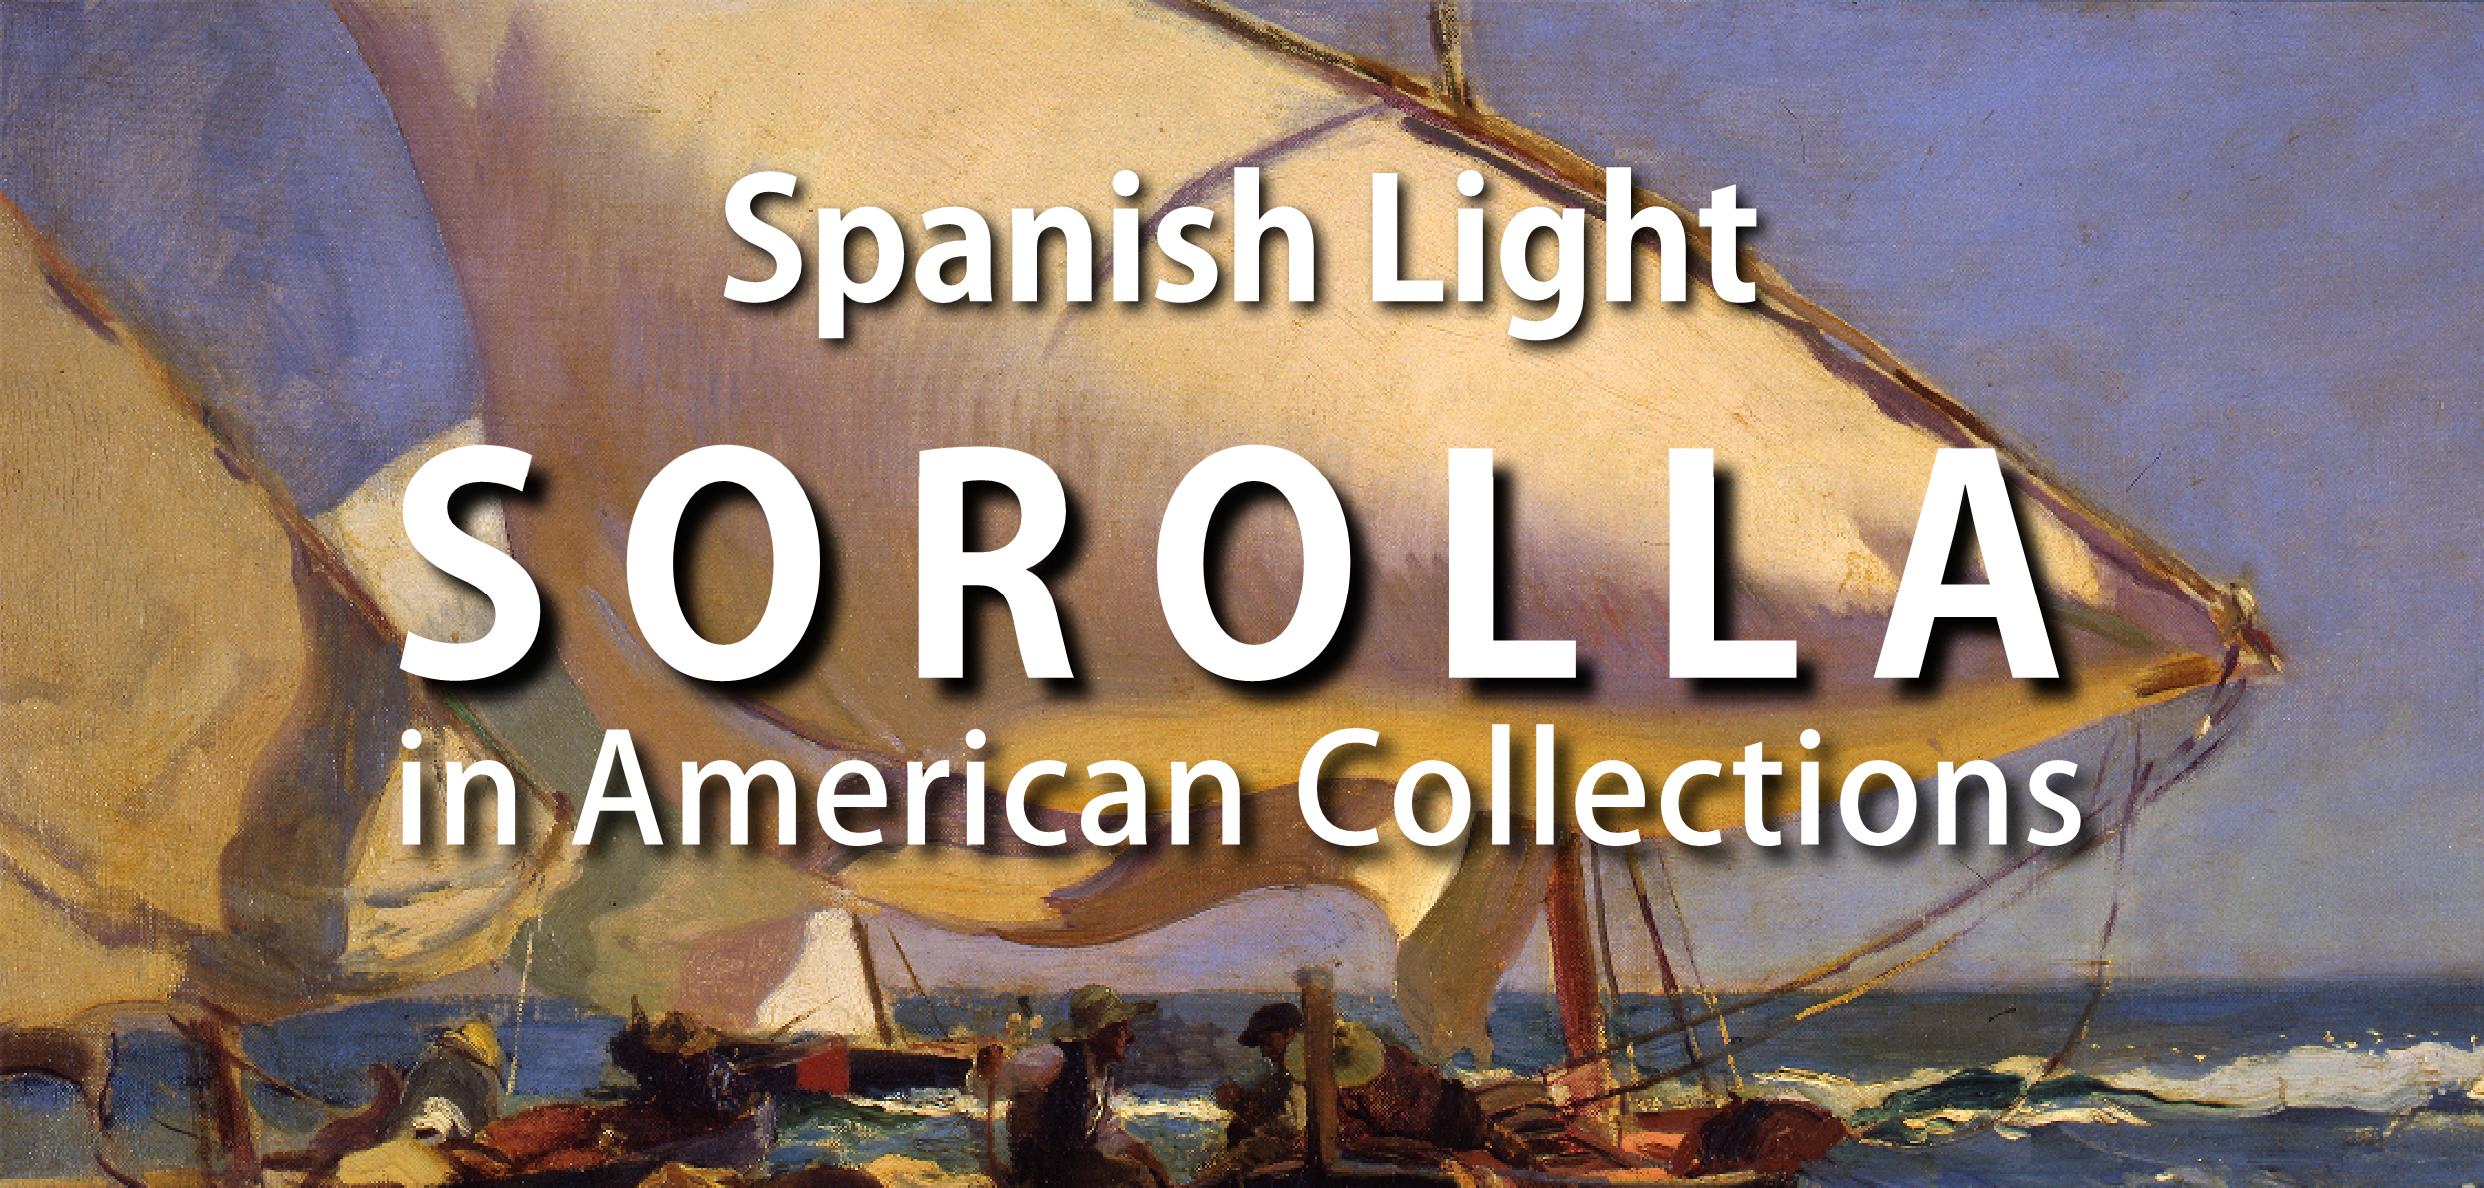 SPANISH LIGHT_SOROLLA IN AMERICAN COLLECTIONS VERSION 2